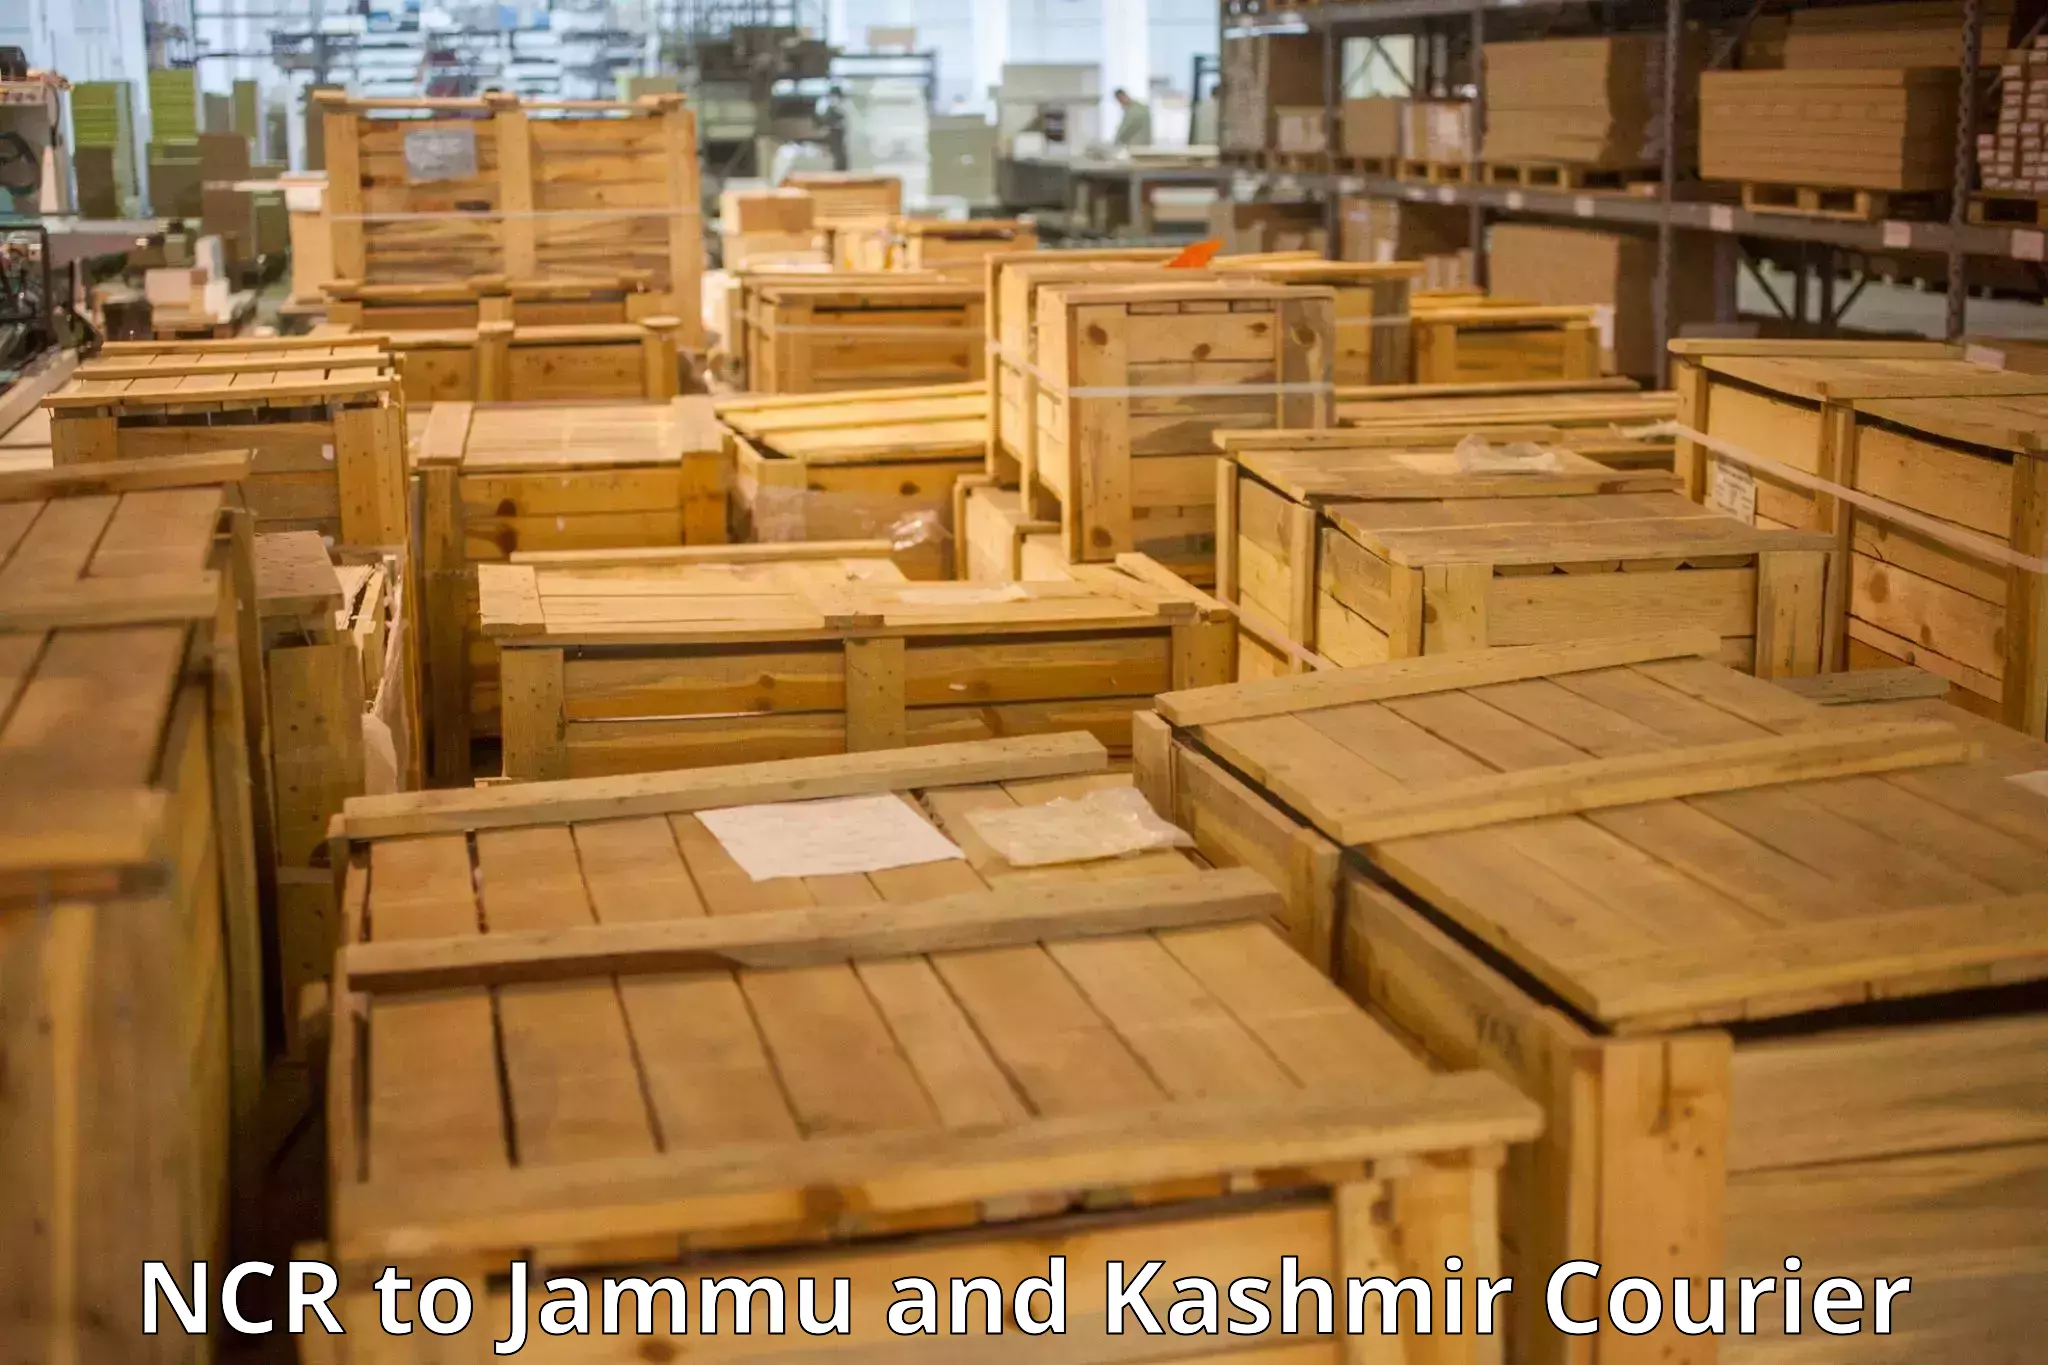 Baggage shipping experience NCR to Jammu